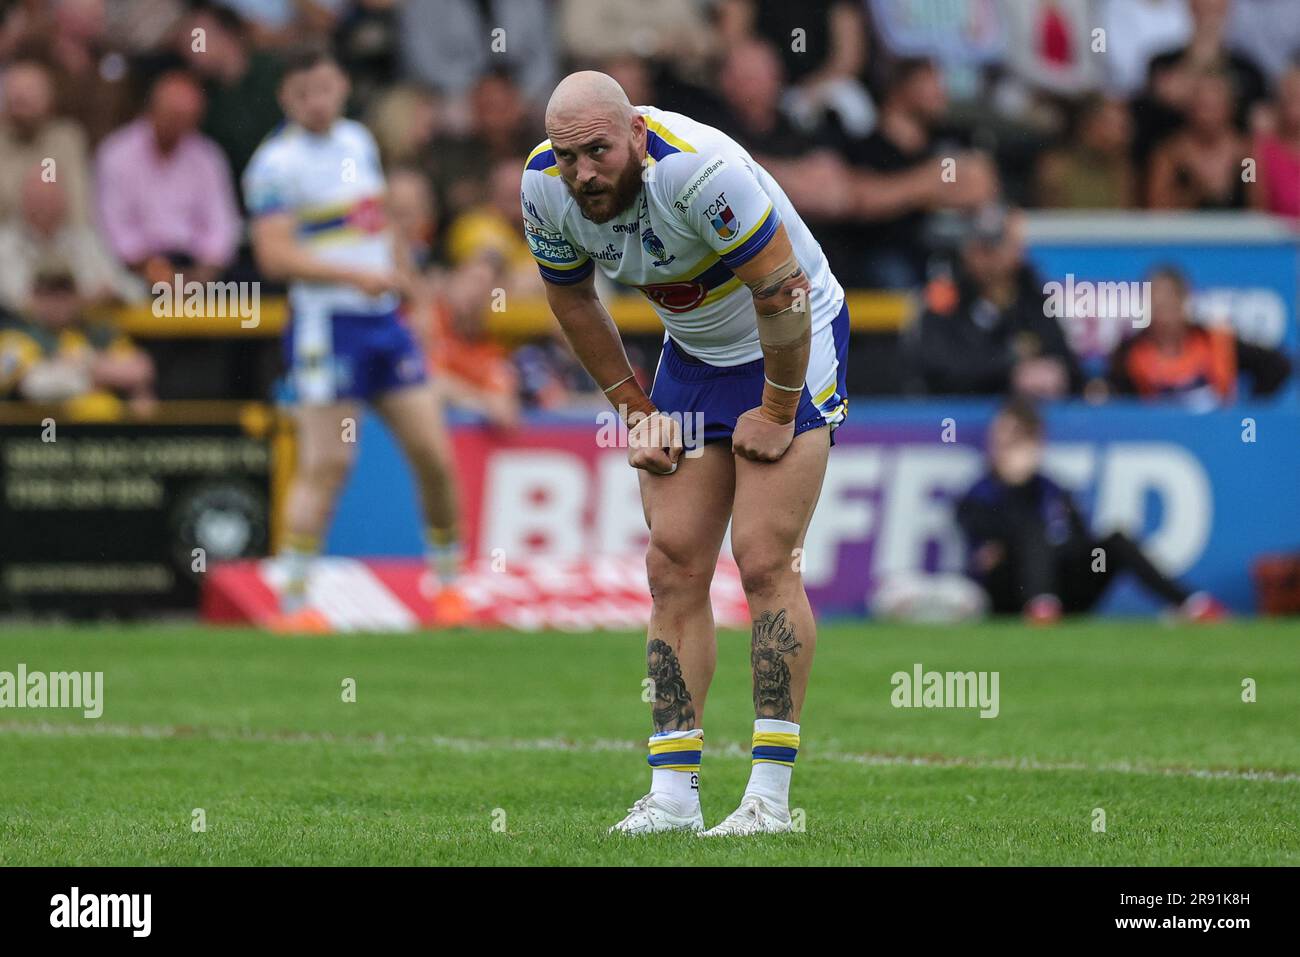 Gil Dudson #17 of Warrington Wolves takes a moment to catch his breath during the Betfred Super League Round 16 match Castleford Tigers vs Warrington Wolves at The Mend-A-Hose Jungle, Castleford, United Kingdom, 23rd June 2023  (Photo by Mark Cosgrove/News Images) Stock Photo